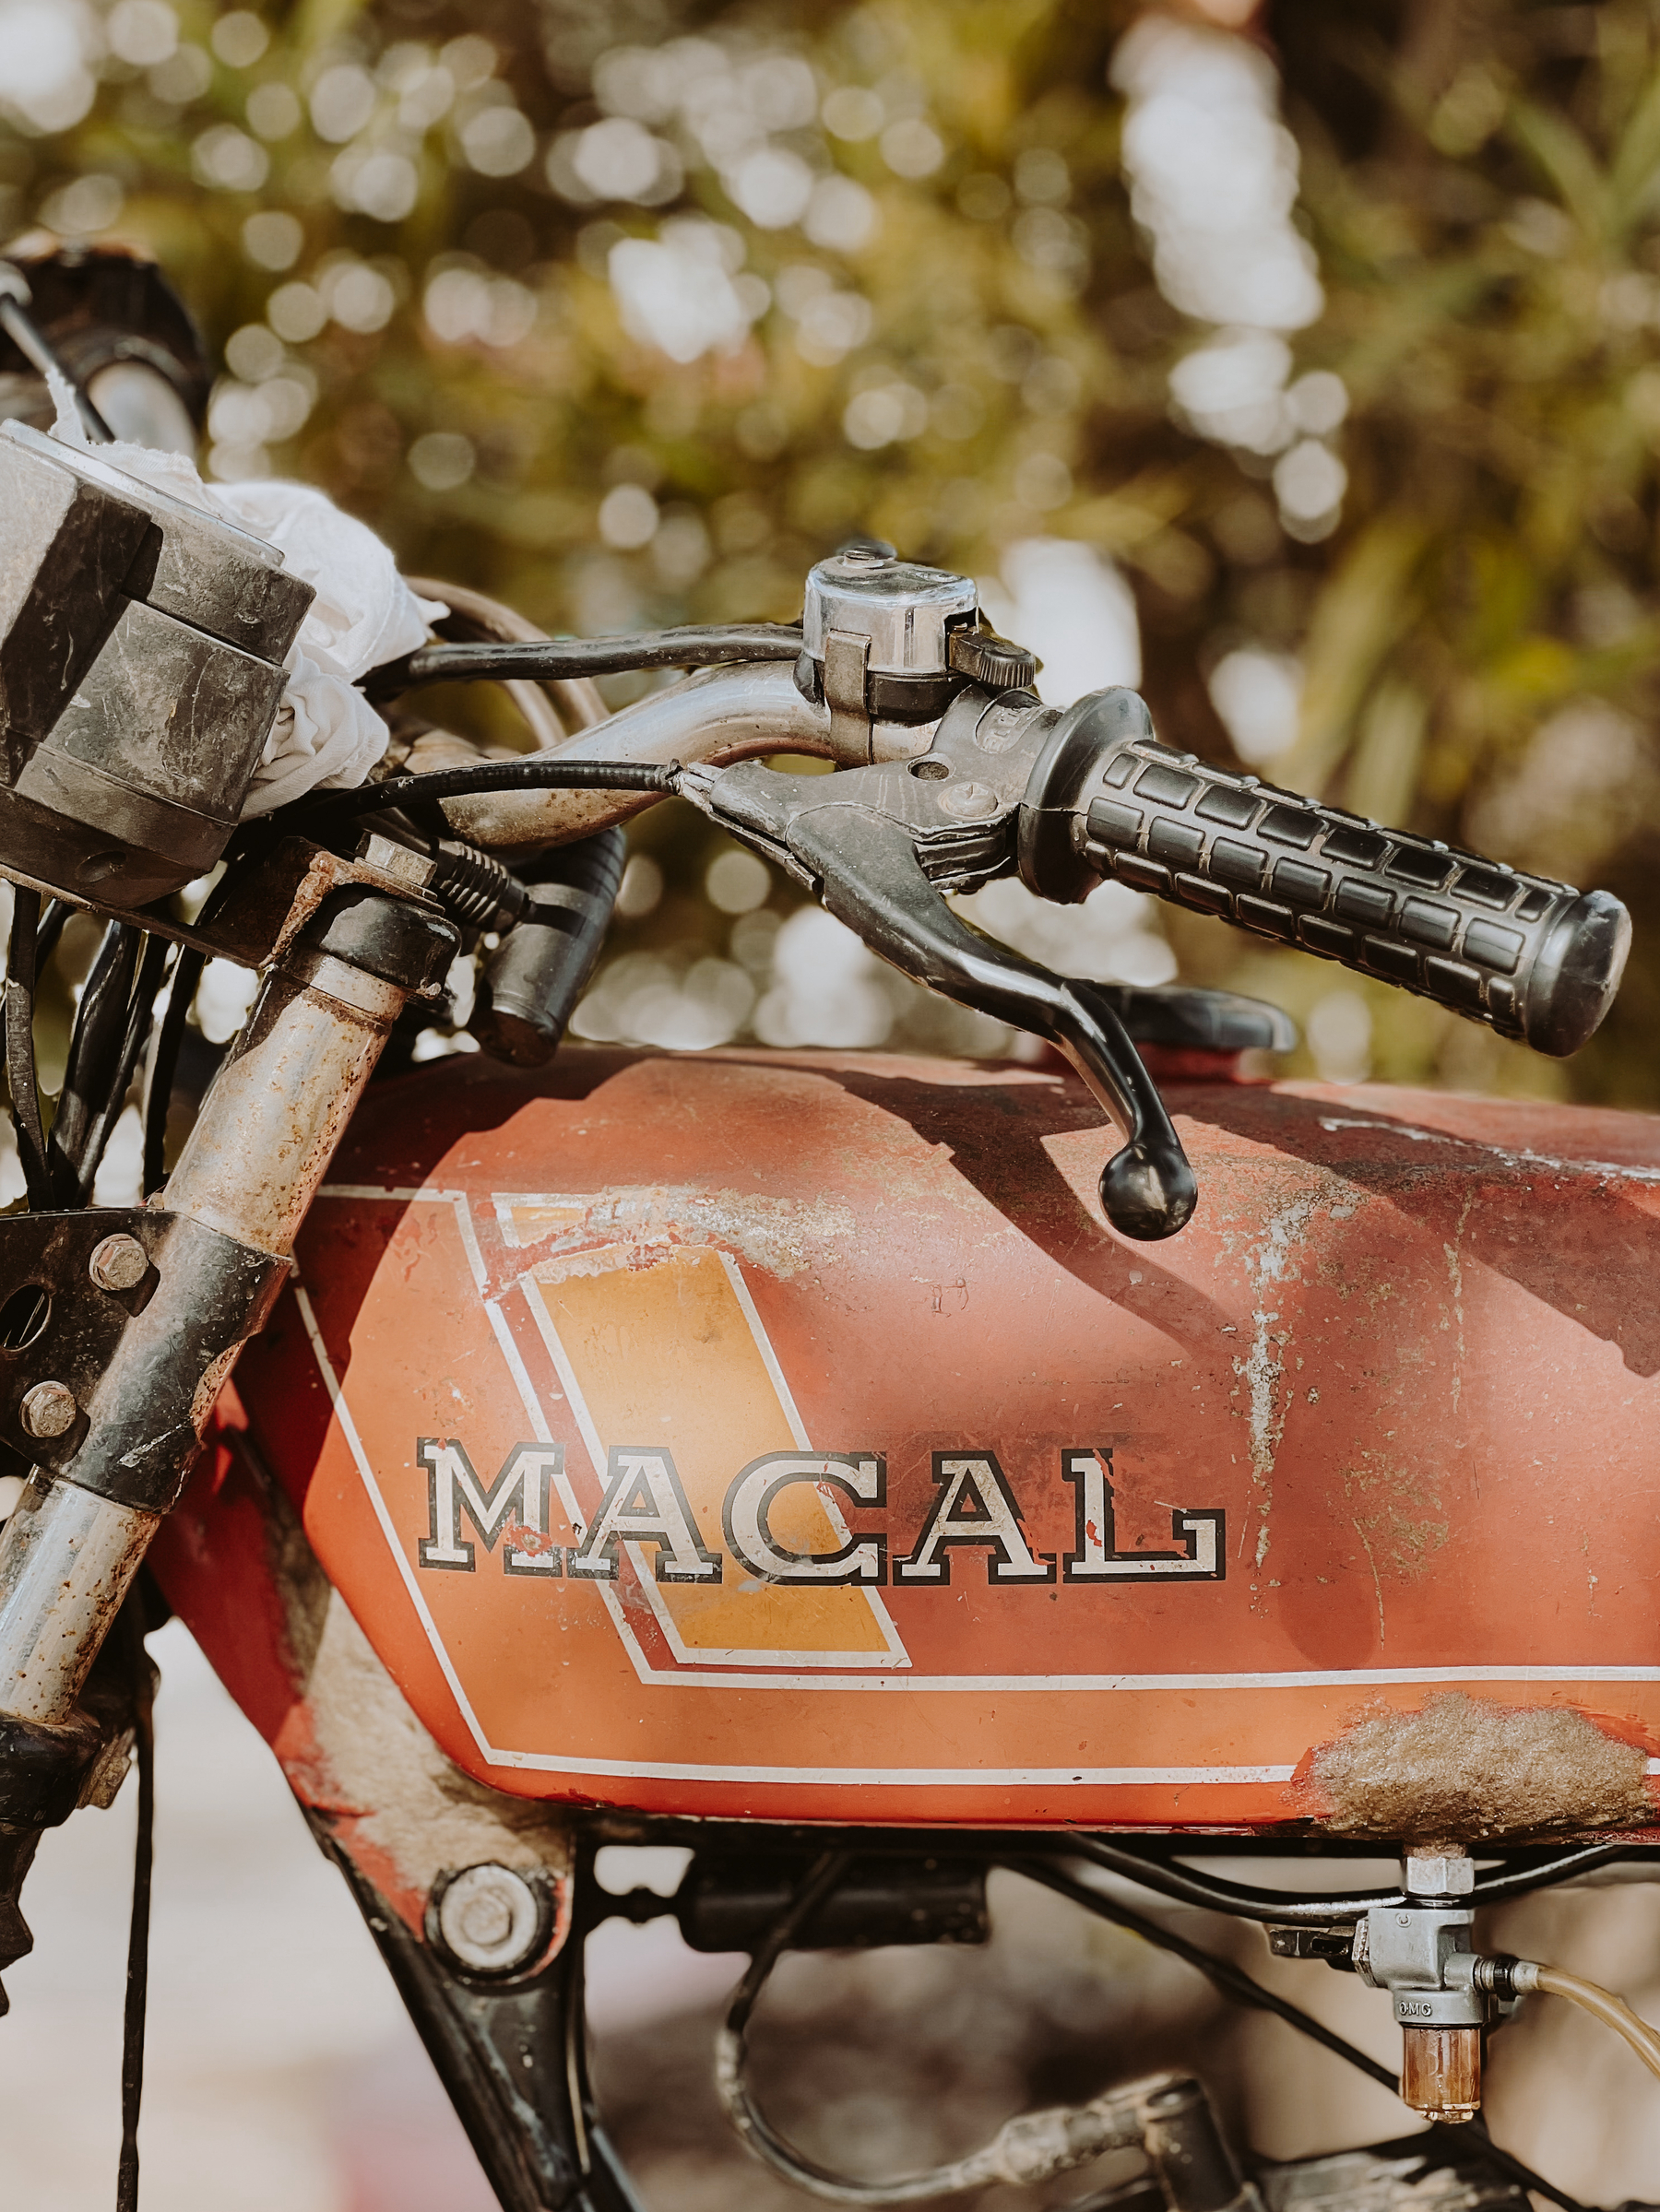 Old, weathered motorcycle with the word &ldquo;MACAL&rdquo; on the fuel tank, showing handlebars, throttle grip, and a clutch lever.